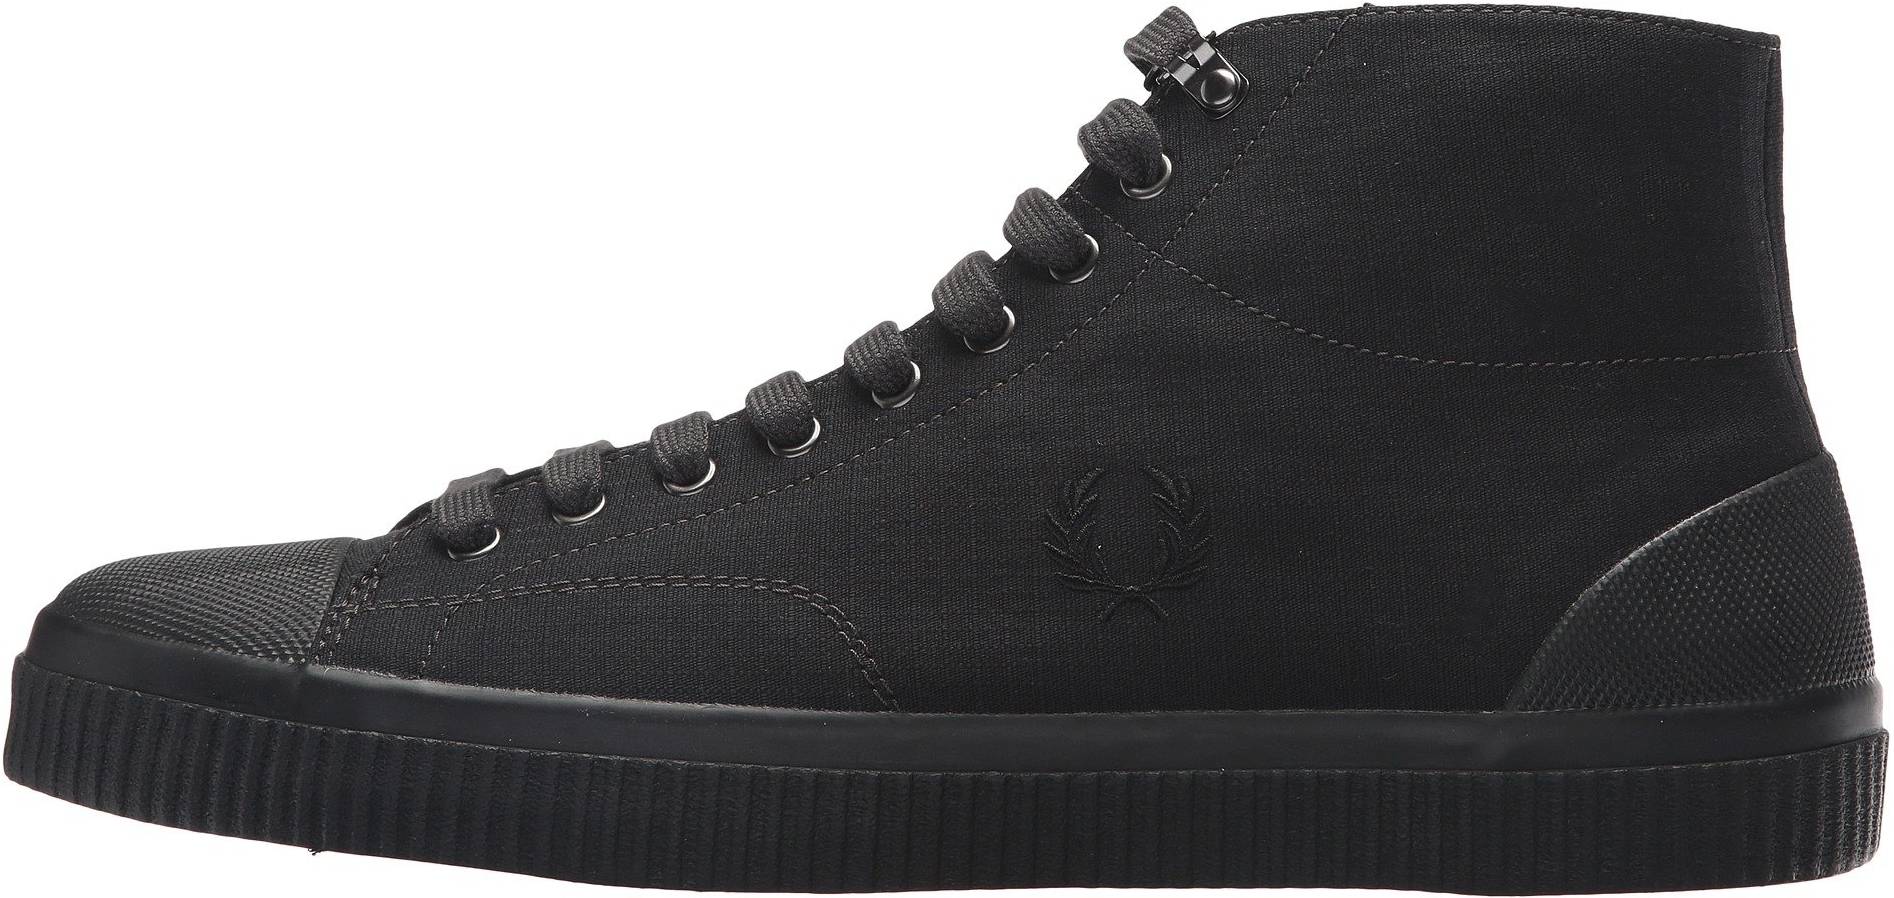 fred perry black shoes